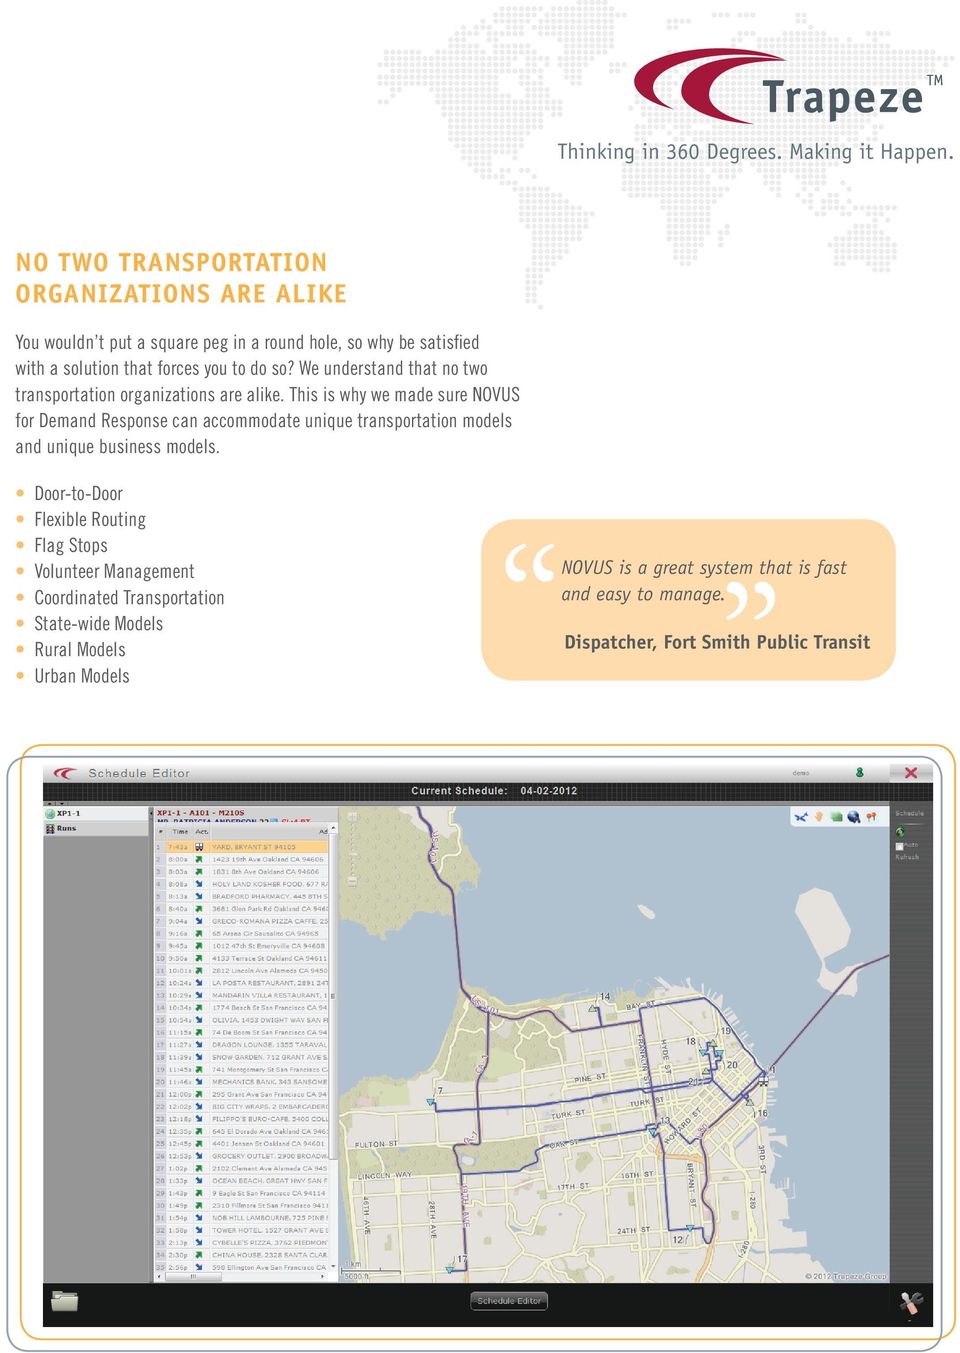 We understand that no two transportation organizations are alike.